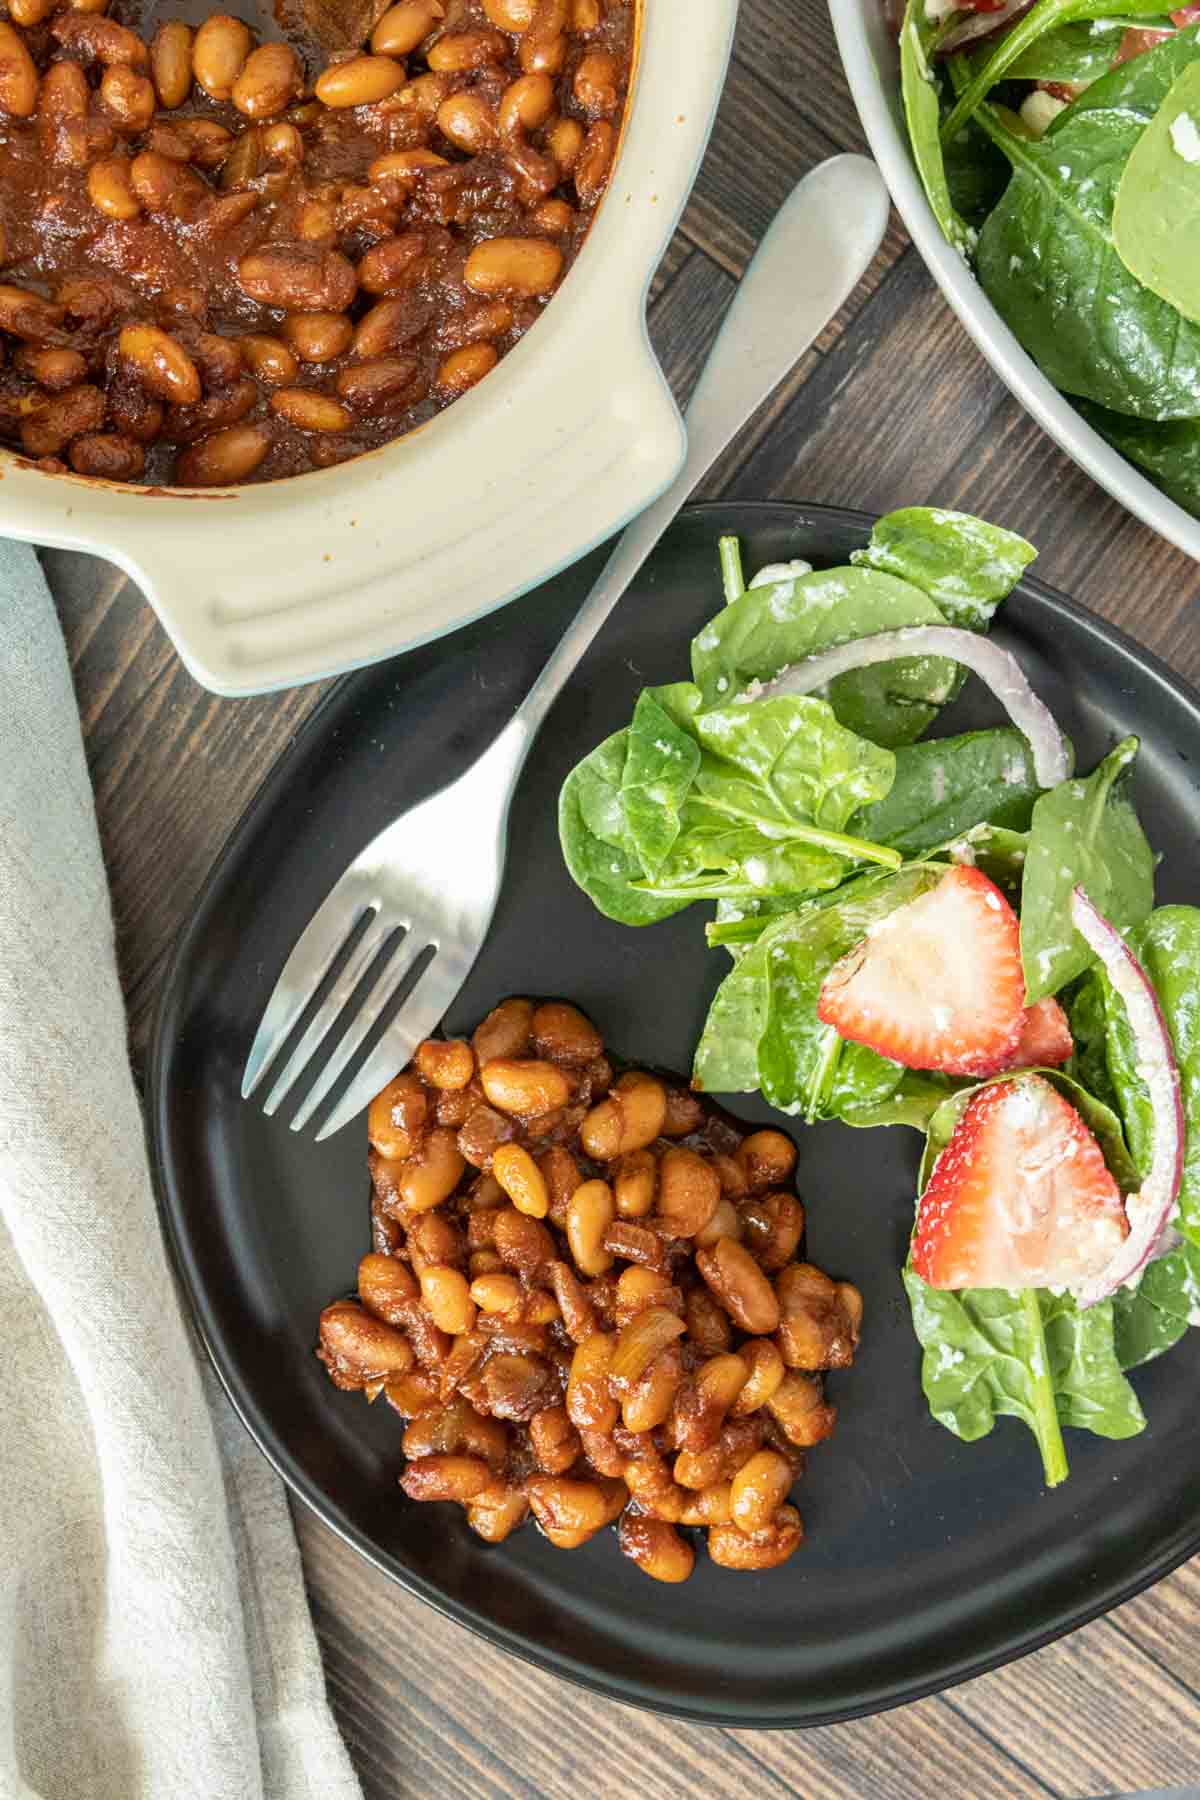 Overhead of vegetarian baked beans on a plate with salad and a fork.